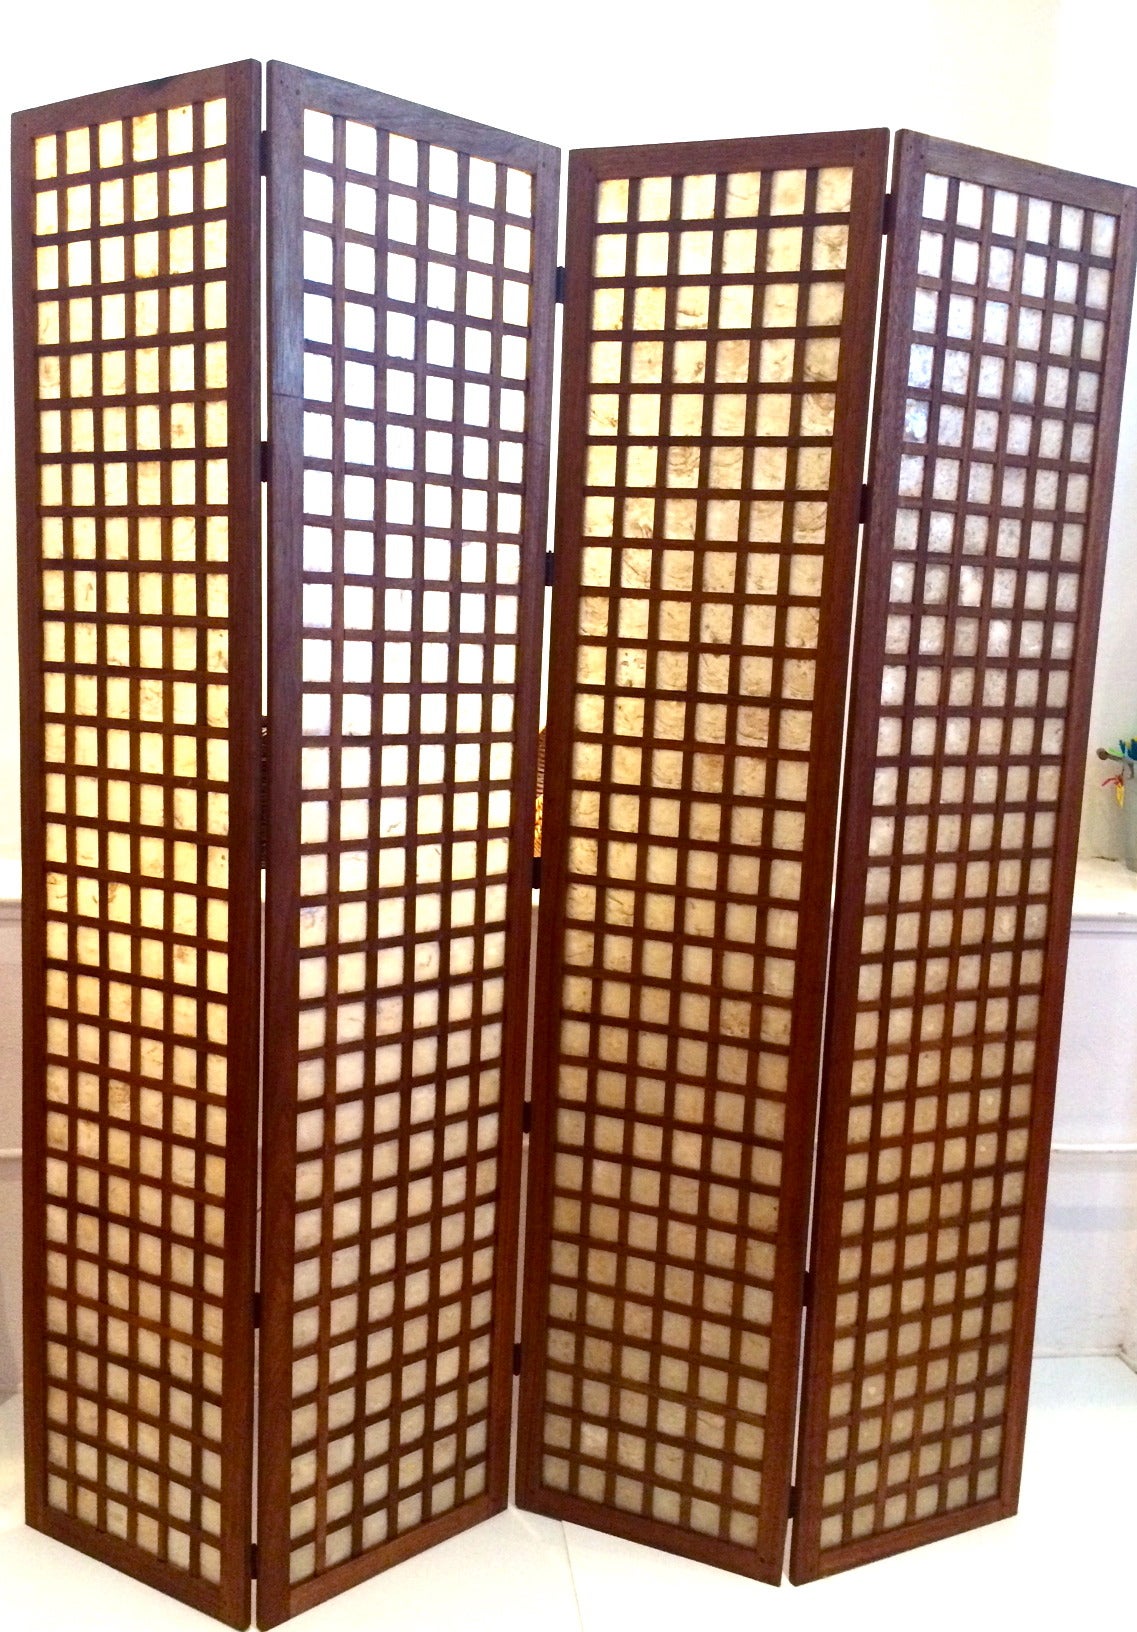 Rare tall room divider or folding screen in solid mahogany with capiz shell inserts, circa 1950s, four panels each panel its 18 1/4